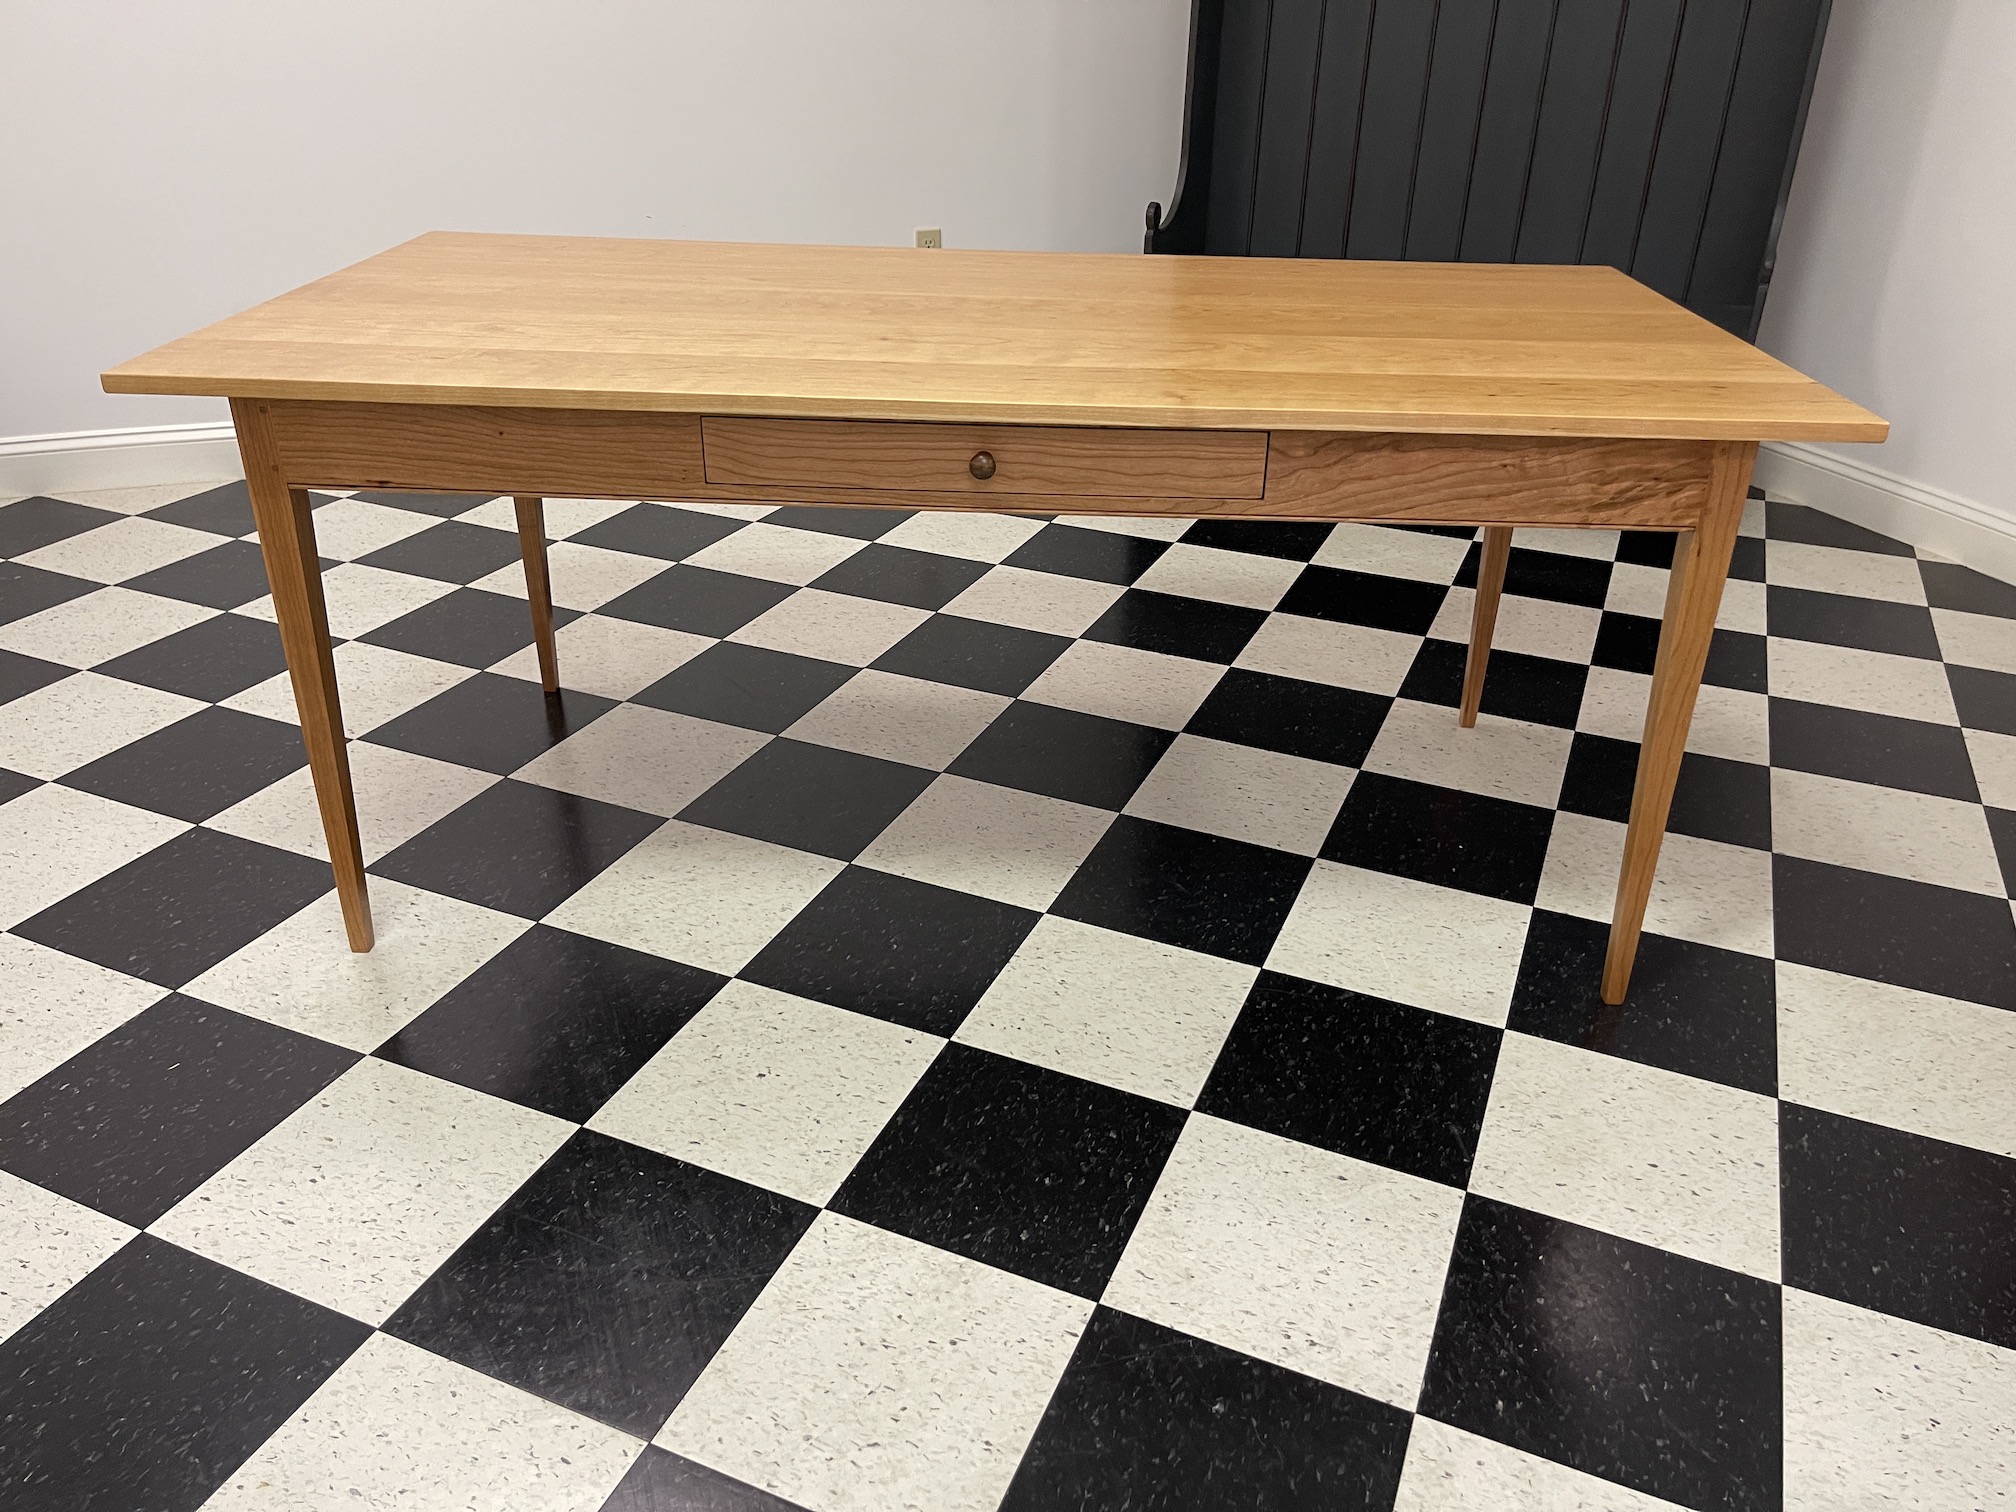 Cherry Wood 6ft X 36in Shaker Table New Model Image